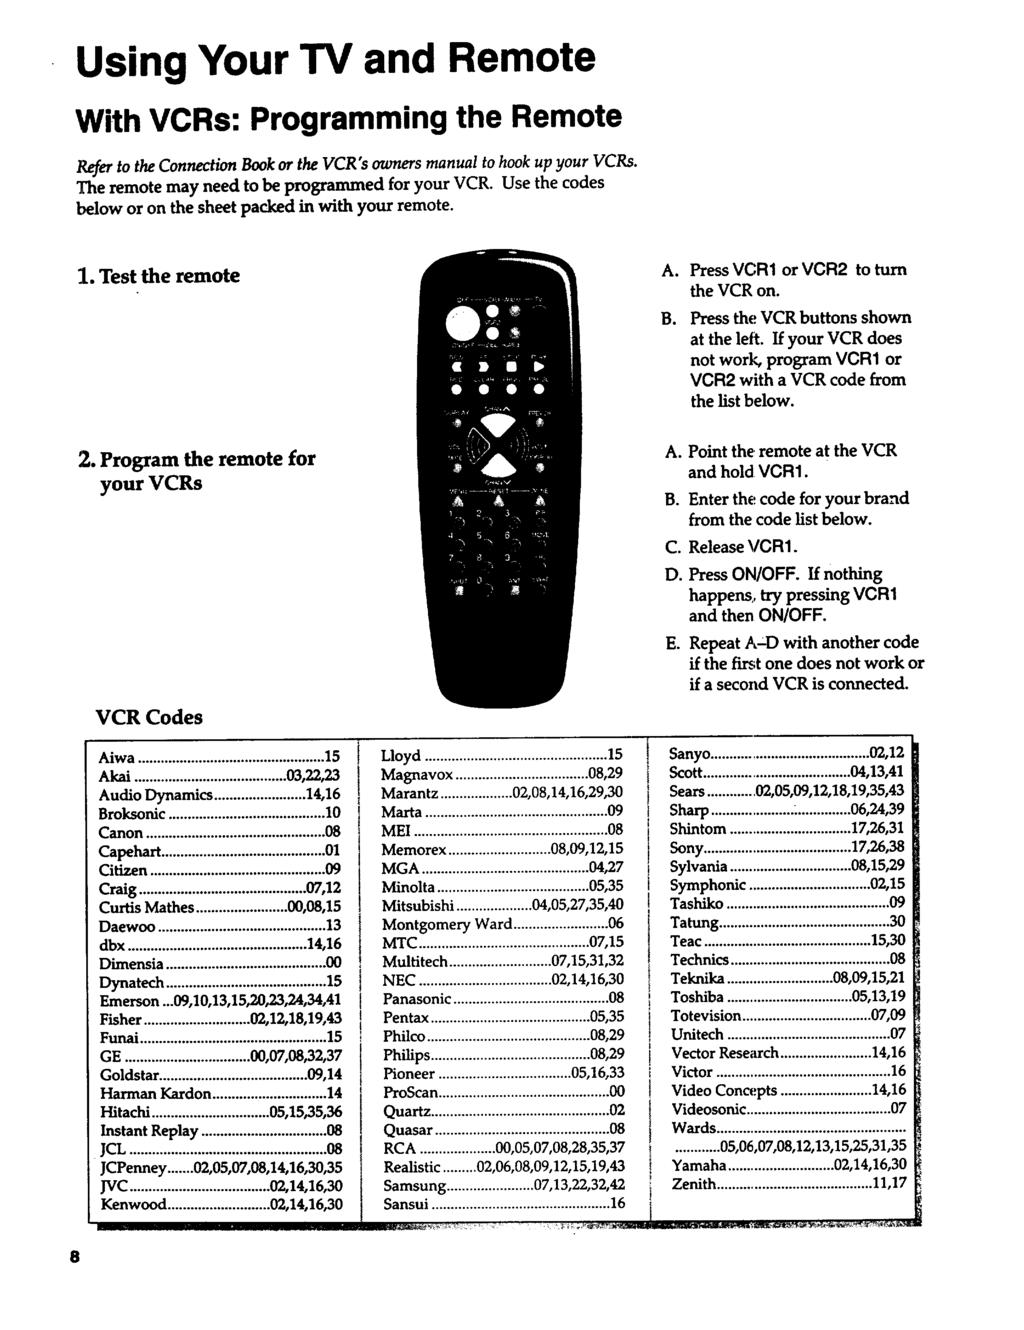 Using Your TV and Remote With VCRs: Programming the Remote Refer to the Connection Book or the VCR" s owners manual to hook up your VCRs. The remote may need to be programmed for your VCR.